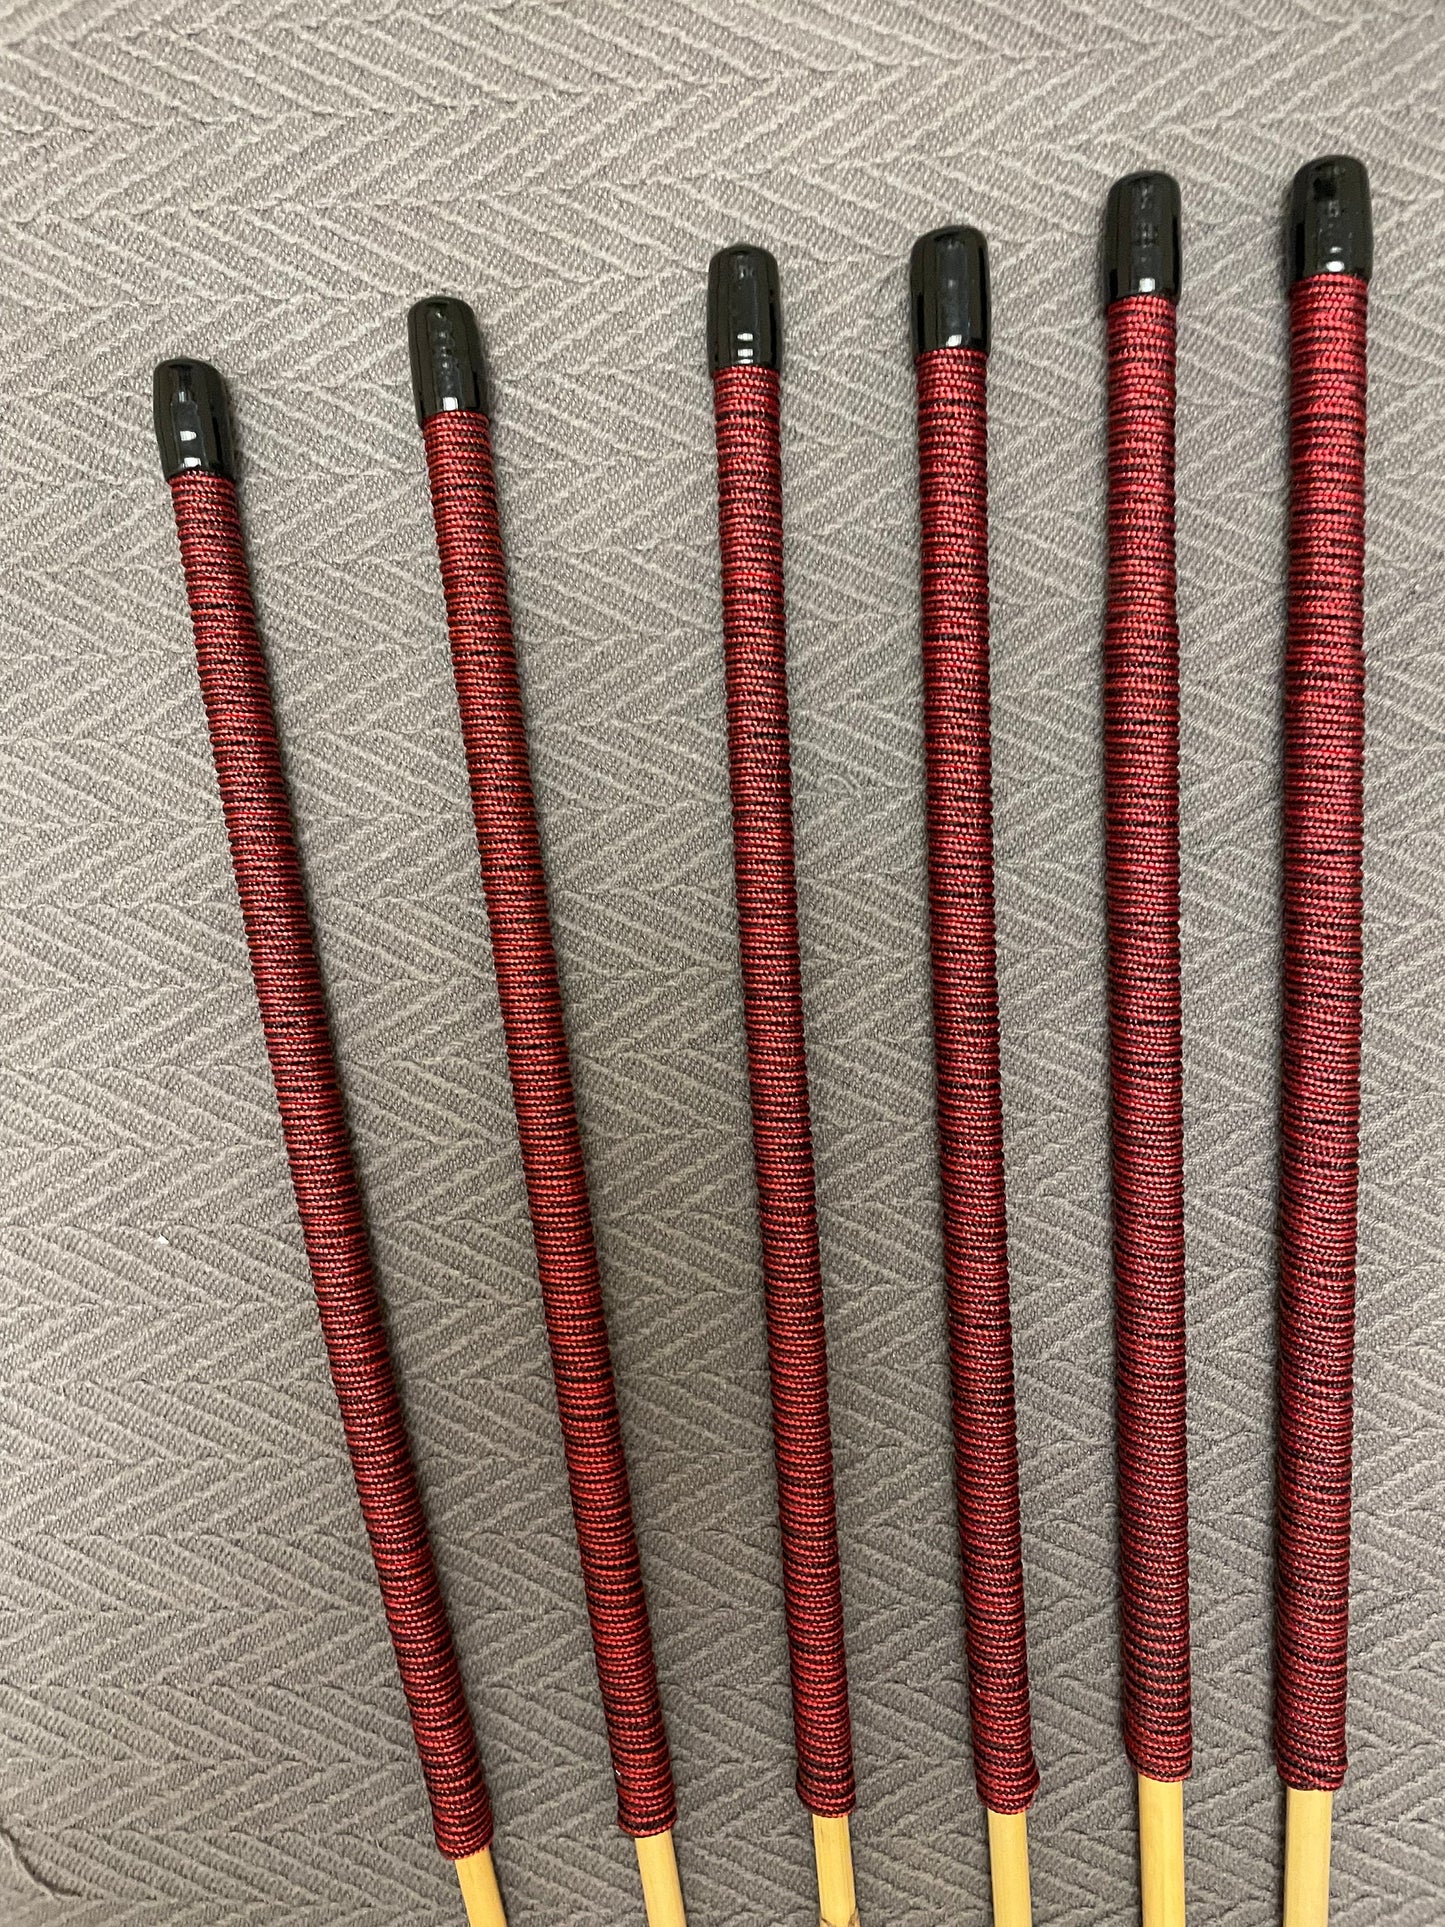 Set of 6 Whippy and Stingy Classic Dragon Canes / Thin Rattan Canes - Red & Black Paracord Handles